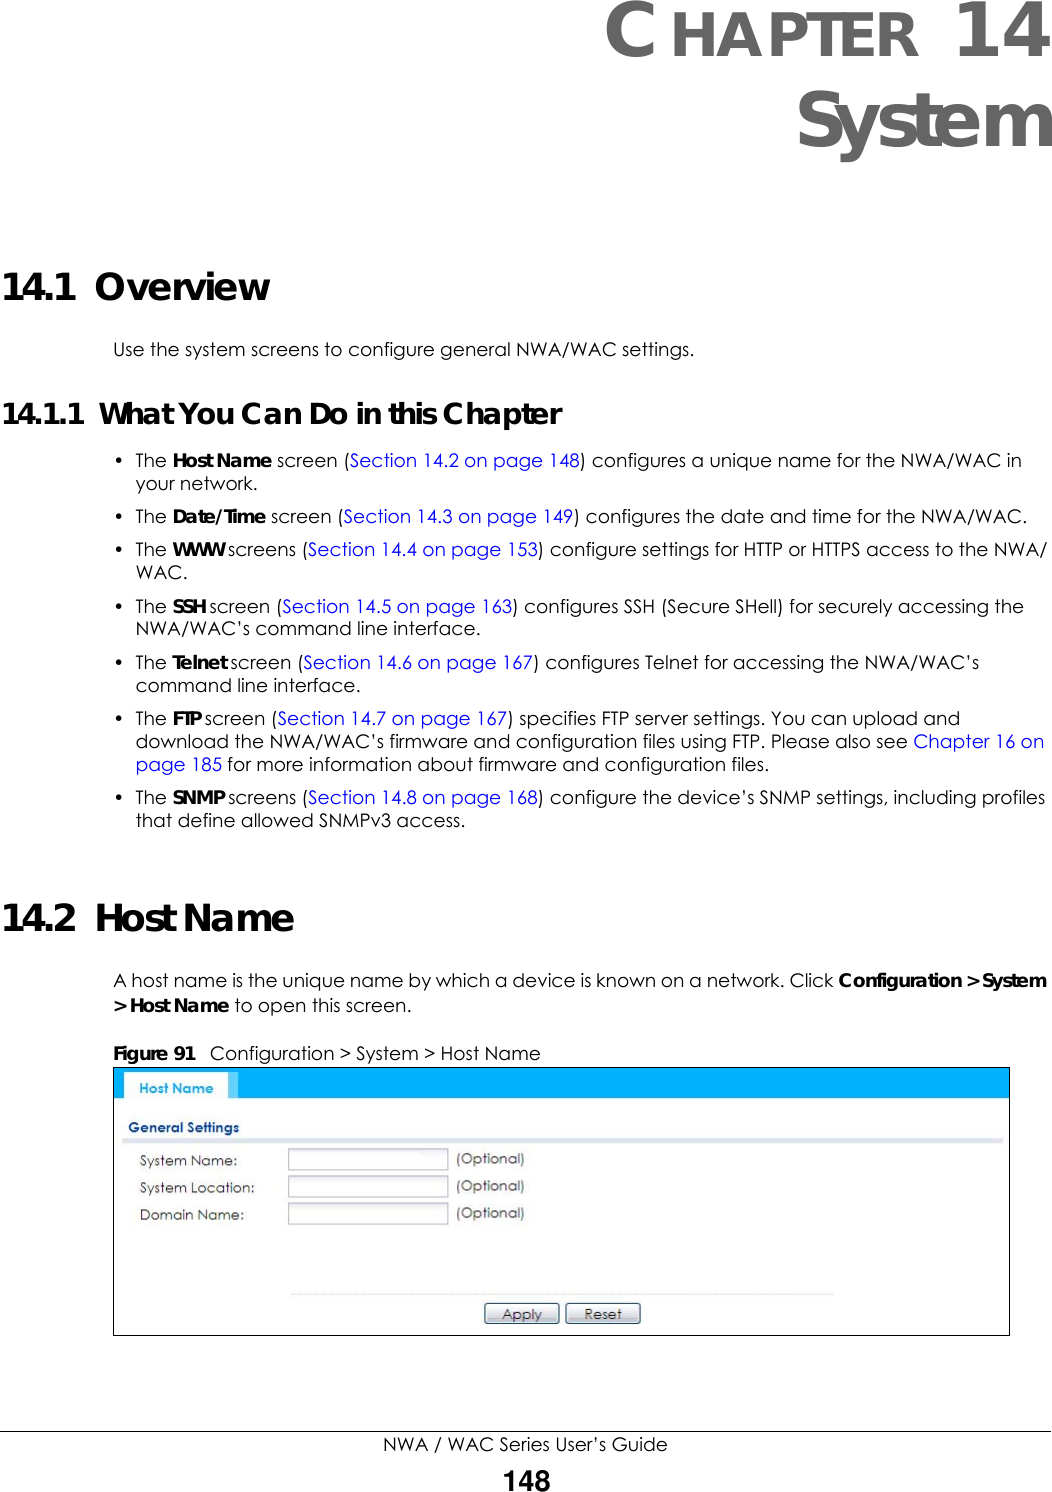 NWA / WAC Series User’s Guide148CHAPTER 14System14.1  OverviewUse the system screens to configure general NWA/WAC settings. 14.1.1  What You Can Do in this Chapter•The Host Name screen (Section 14.2 on page 148) configures a unique name for the NWA/WAC in your network.• The Date/Time screen (Section 14.3 on page 149) configures the date and time for the NWA/WAC.• The WWW screens (Section 14.4 on page 153) configure settings for HTTP or HTTPS access to the NWA/WAC. • The SSH screen (Section 14.5 on page 163) configures SSH (Secure SHell) for securely accessing the NWA/WAC’s command line interface. • The Telnet screen (Section 14.6 on page 167) configures Telnet for accessing the NWA/WAC’s command line interface. •The FTP screen (Section 14.7 on page 167) specifies FTP server settings. You can upload and download the NWA/WAC’s firmware and configuration files using FTP. Please also see Chapter 16 on page 185 for more information about firmware and configuration files.• The SNMP screens (Section 14.8 on page 168) configure the device’s SNMP settings, including profiles that define allowed SNMPv3 access.14.2  Host NameA host name is the unique name by which a device is known on a network. Click Configuration &gt; System &gt; Host Name to open this screen.Figure 91   Configuration &gt; System &gt; Host Name